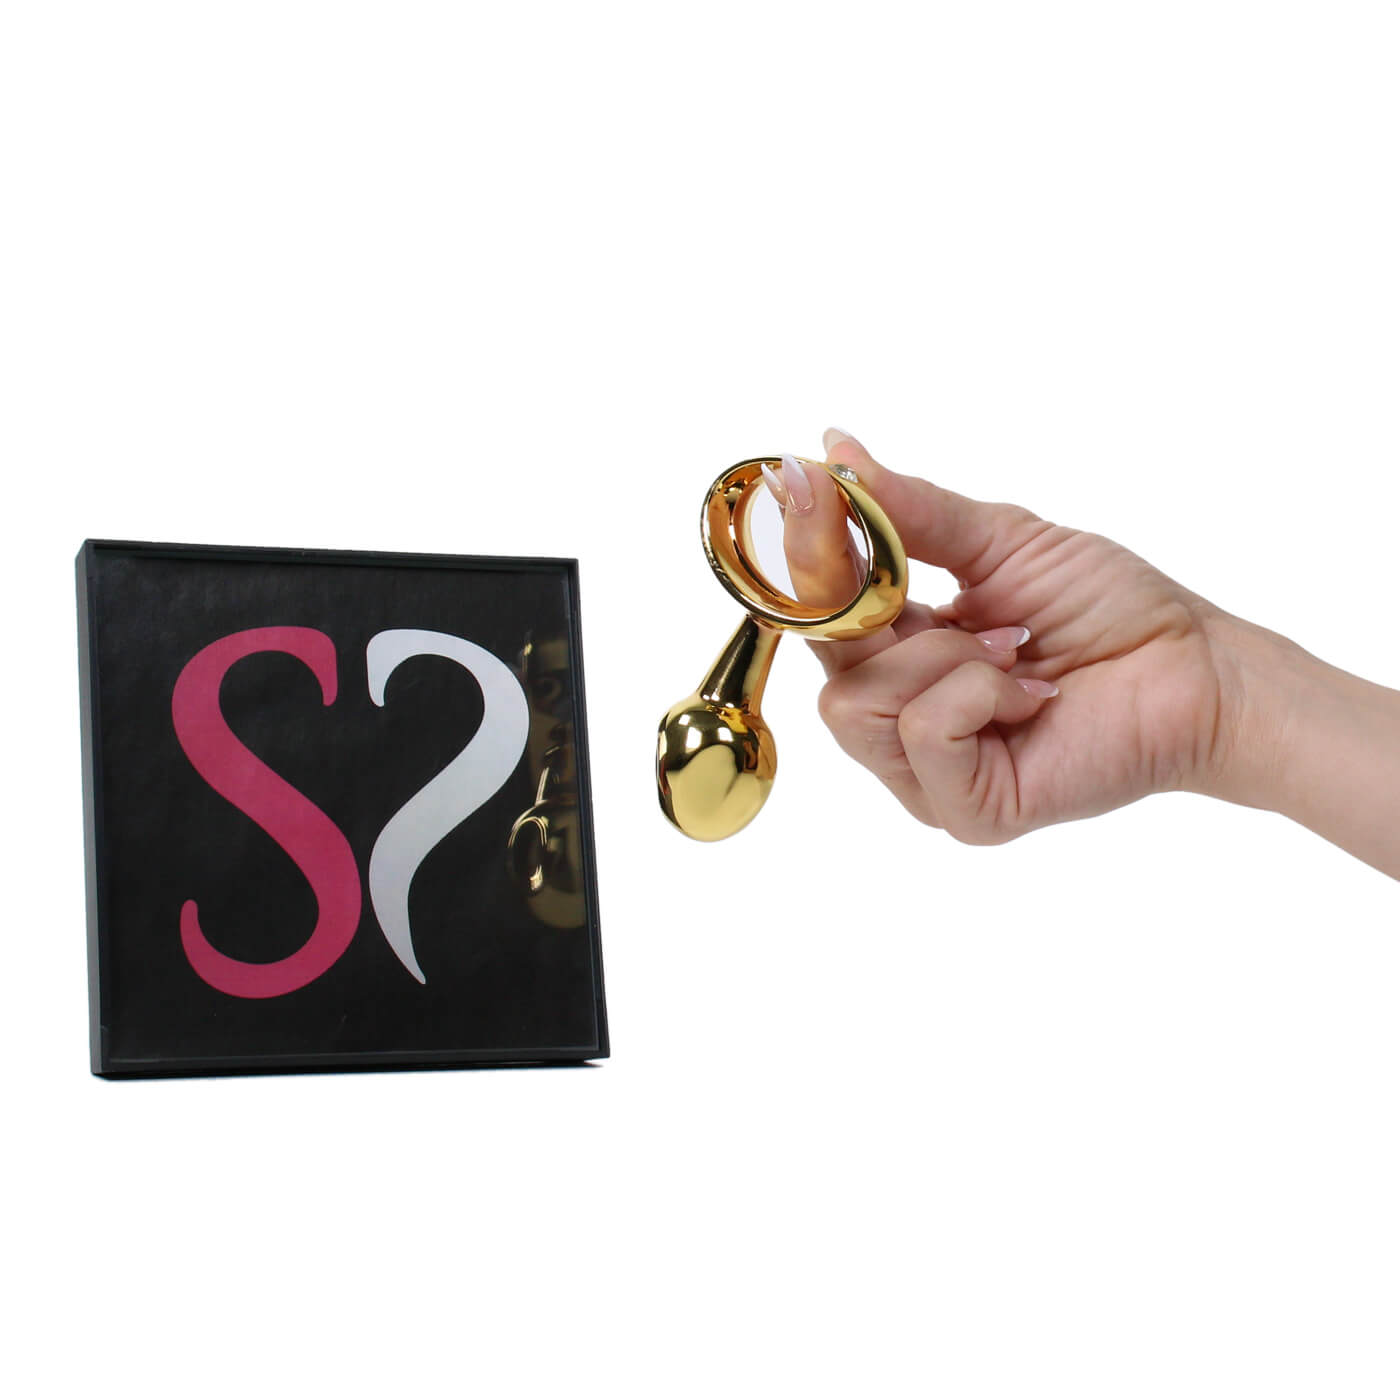 Backdoor Bliss Stainless Steel Gold Small Butt Plug With Ring Handle